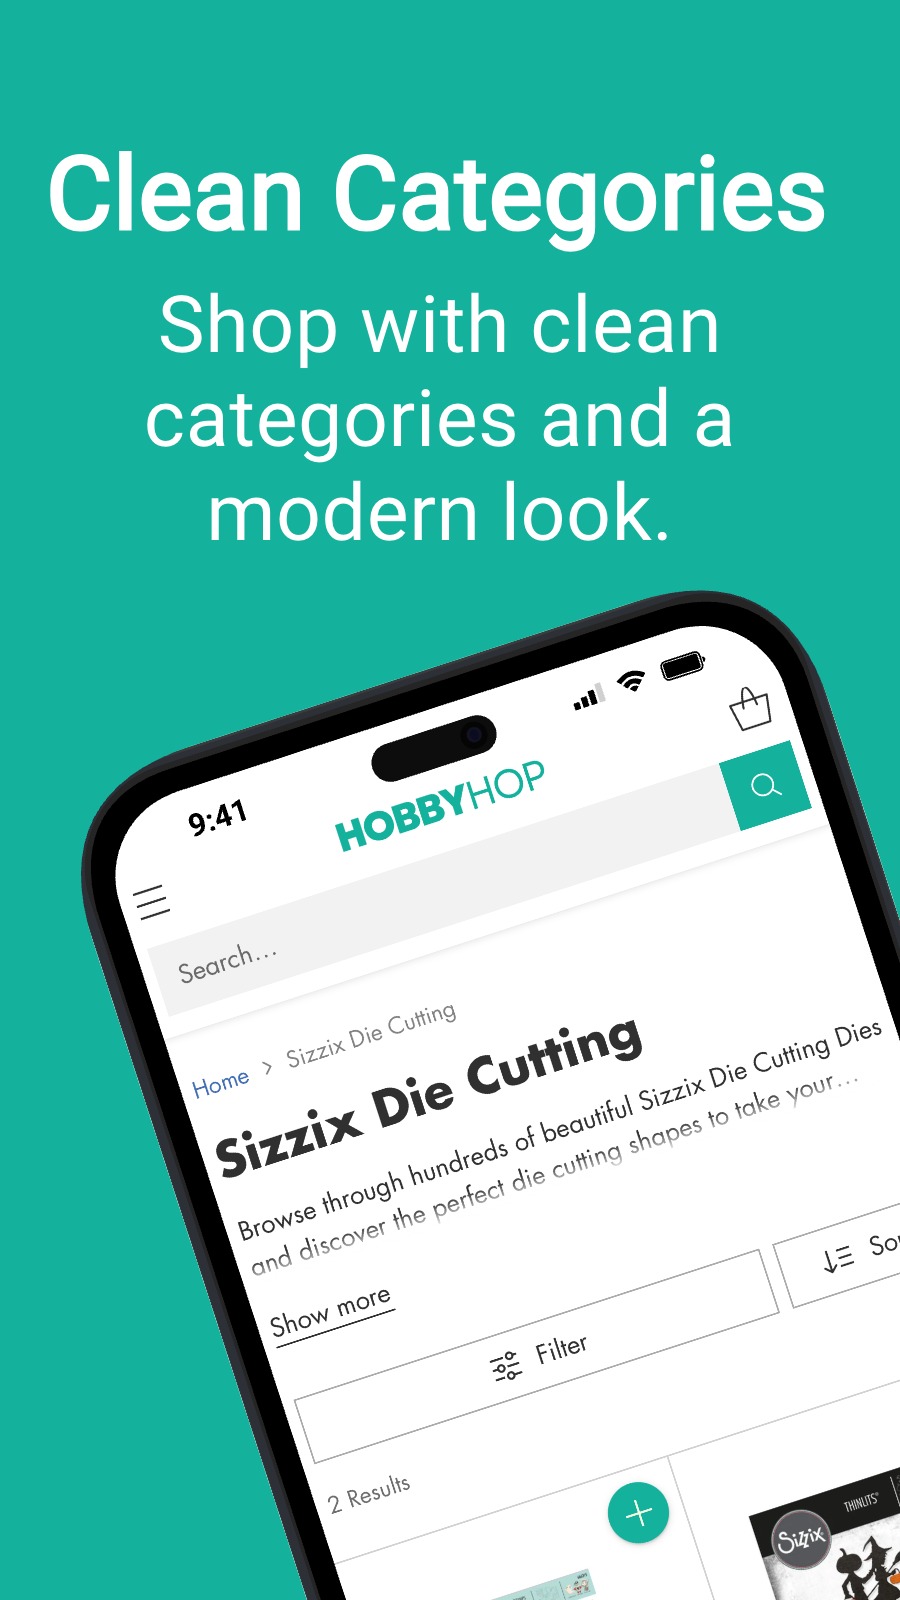 Clean Categories - Shop with clean categories and a modern look.